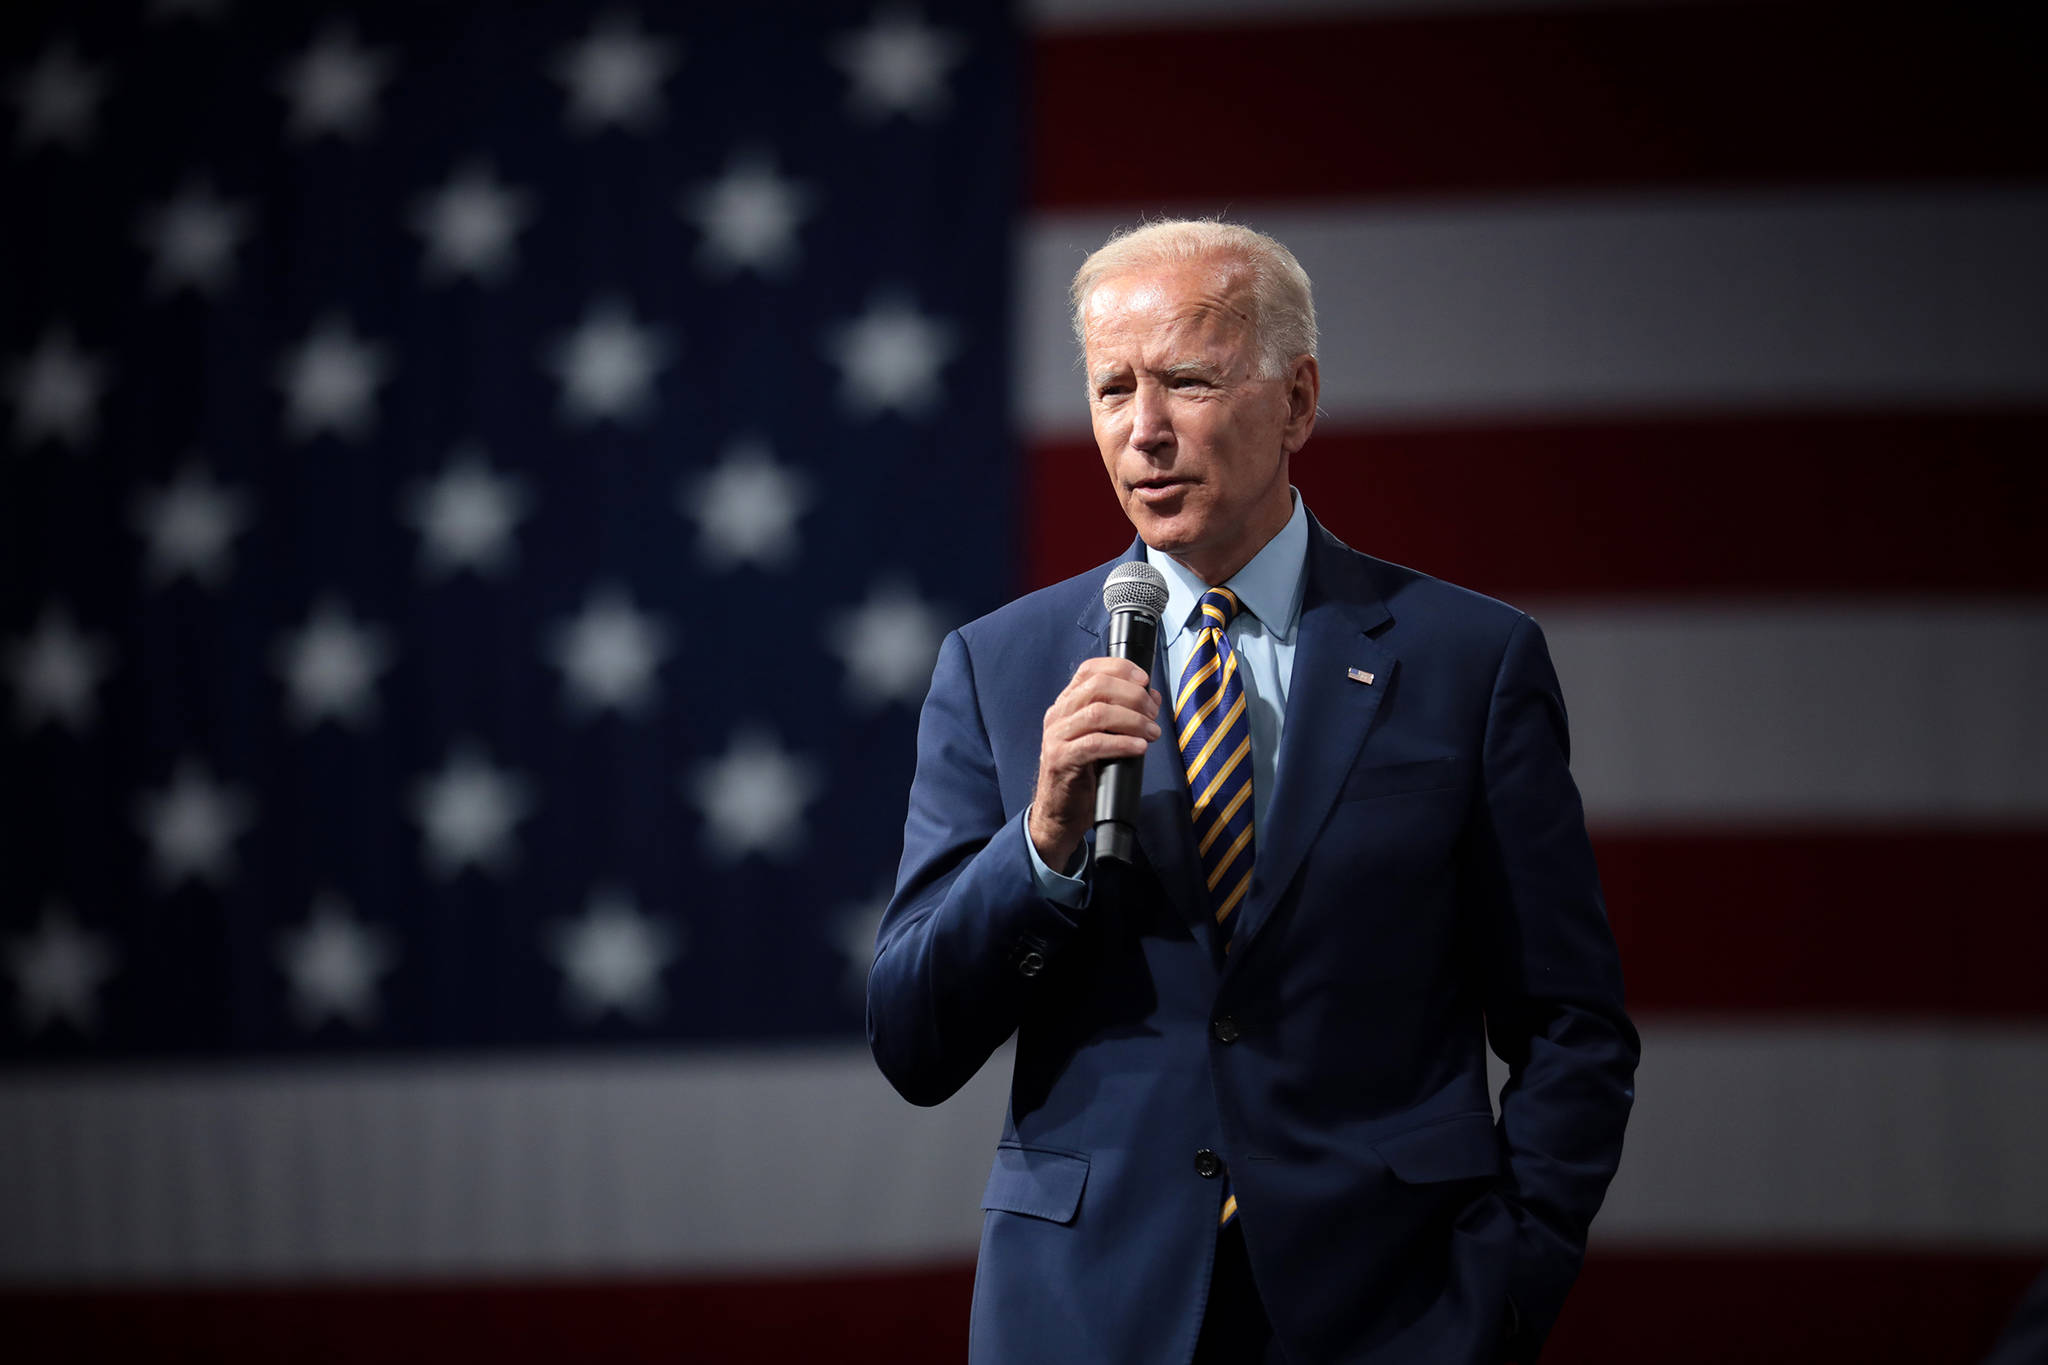 Former Vice President of the United States Joe Biden speaks with attendees at the Presidential Gun Sense Forum hosted by Everytown for Gun Safety and Moms Demand Action at the Iowa Events Center in Des Moines, Iowa. (Courtesy Photo / Gage Skidmore, Flickr)